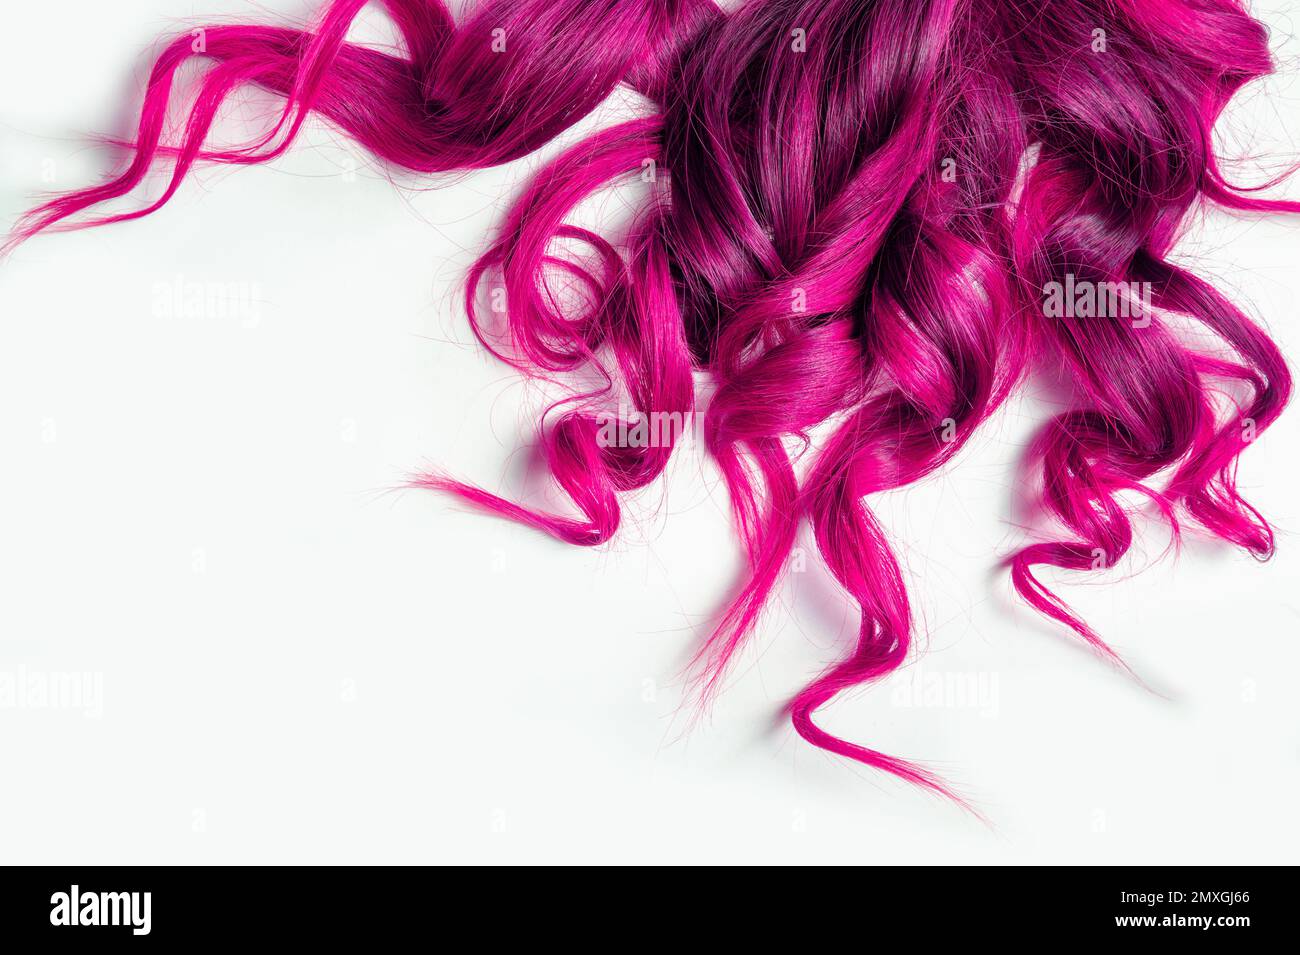 XZGDEN 250 Density Hot Pink Deep Curly Lace Front  Ubuy India